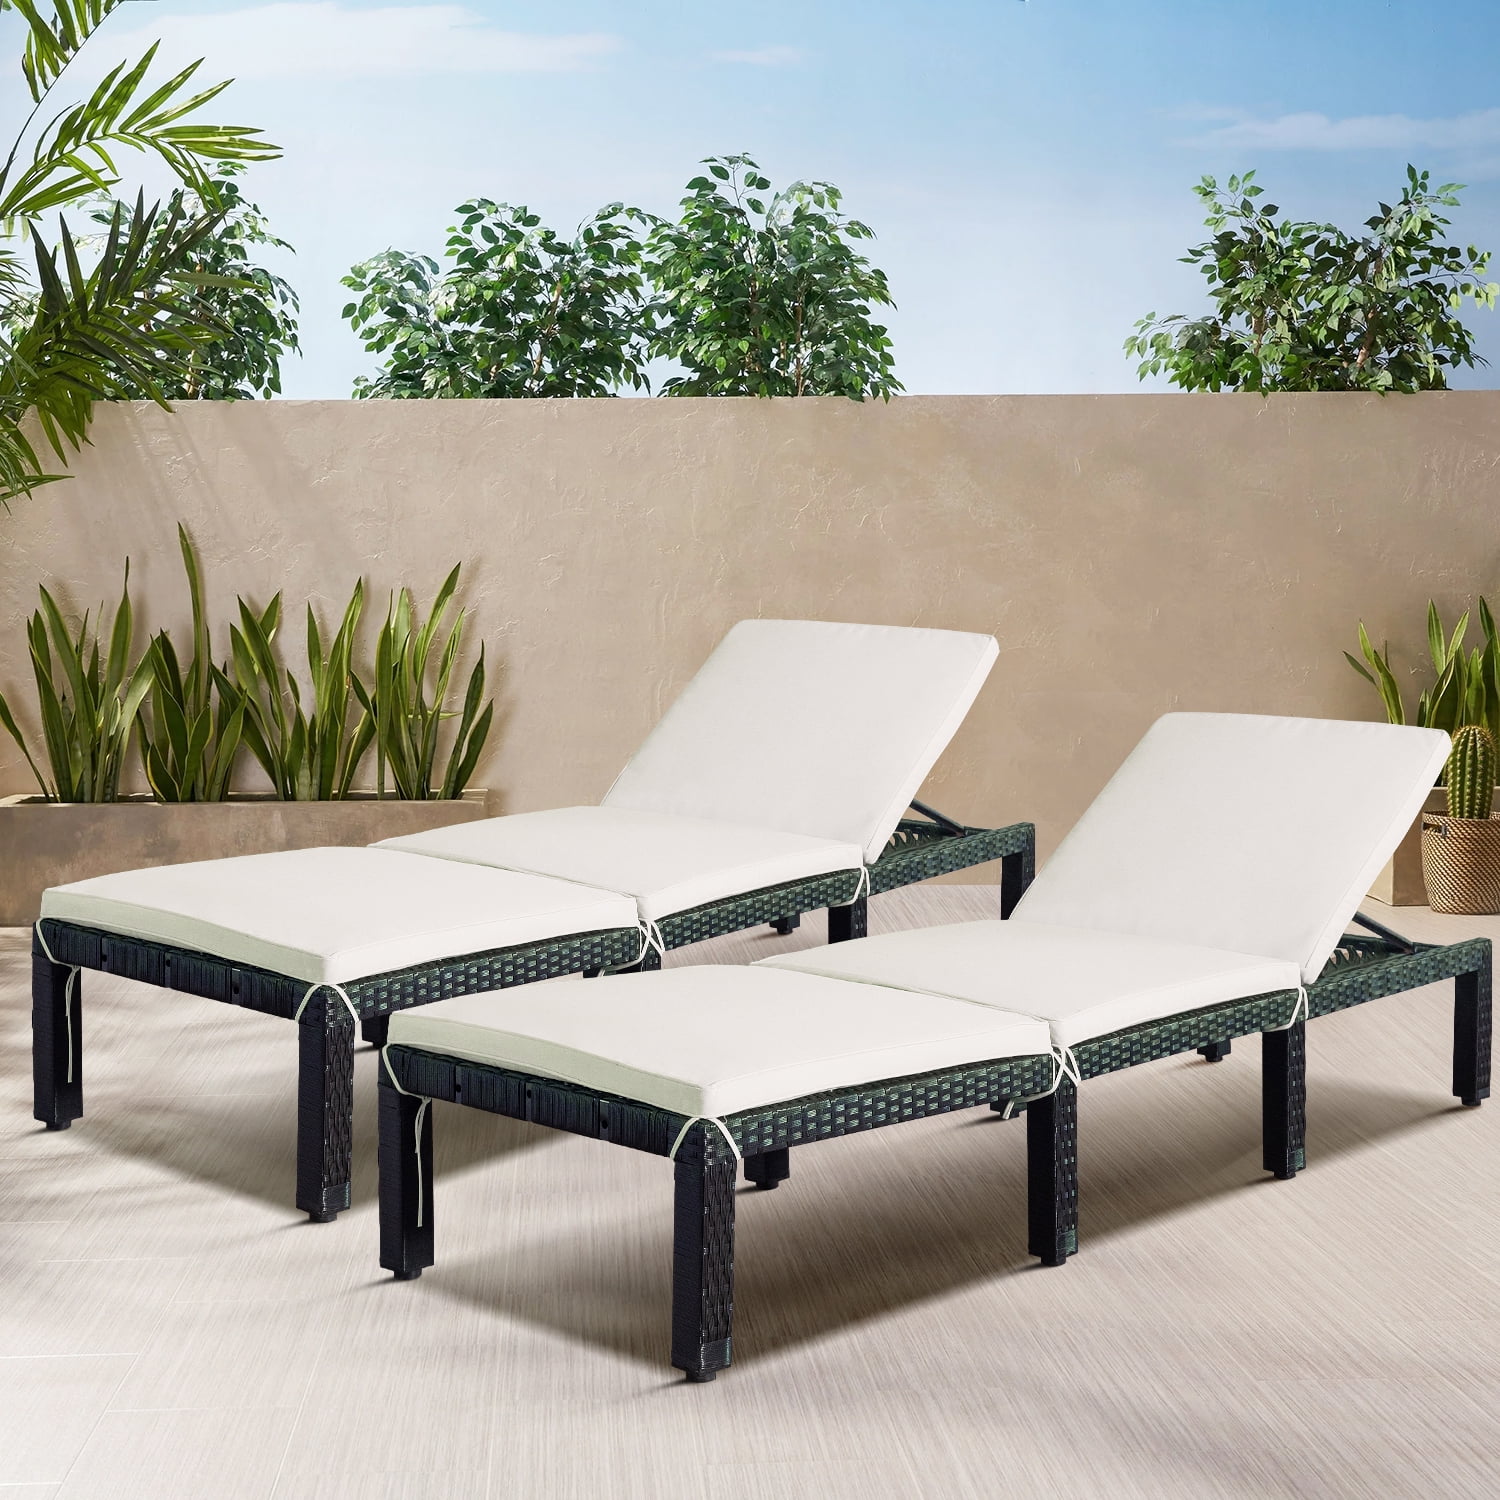 Patio Chaise Lounge Chairs Furniture, Pool Chaise Lounge Chairs Set Of 2